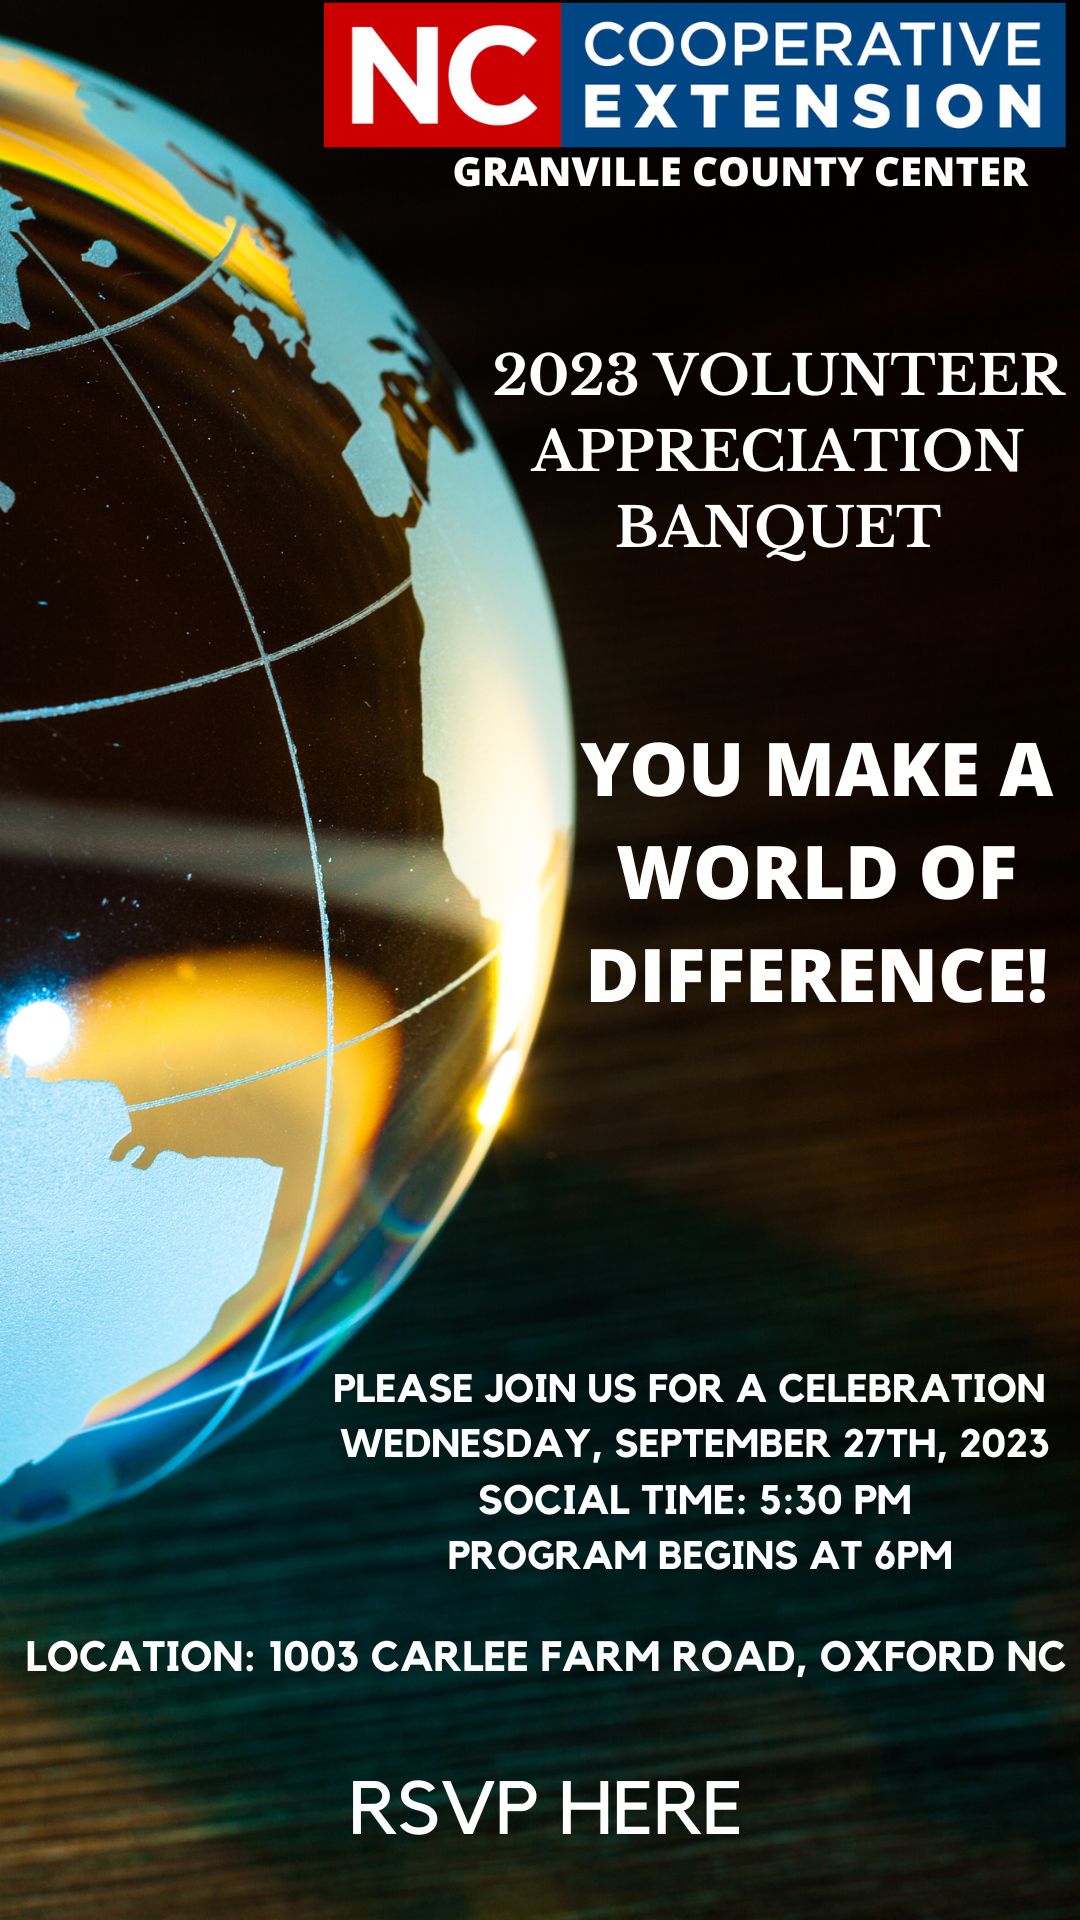 2023 Volunteer Appreciation Banquet. You make a world of difference!